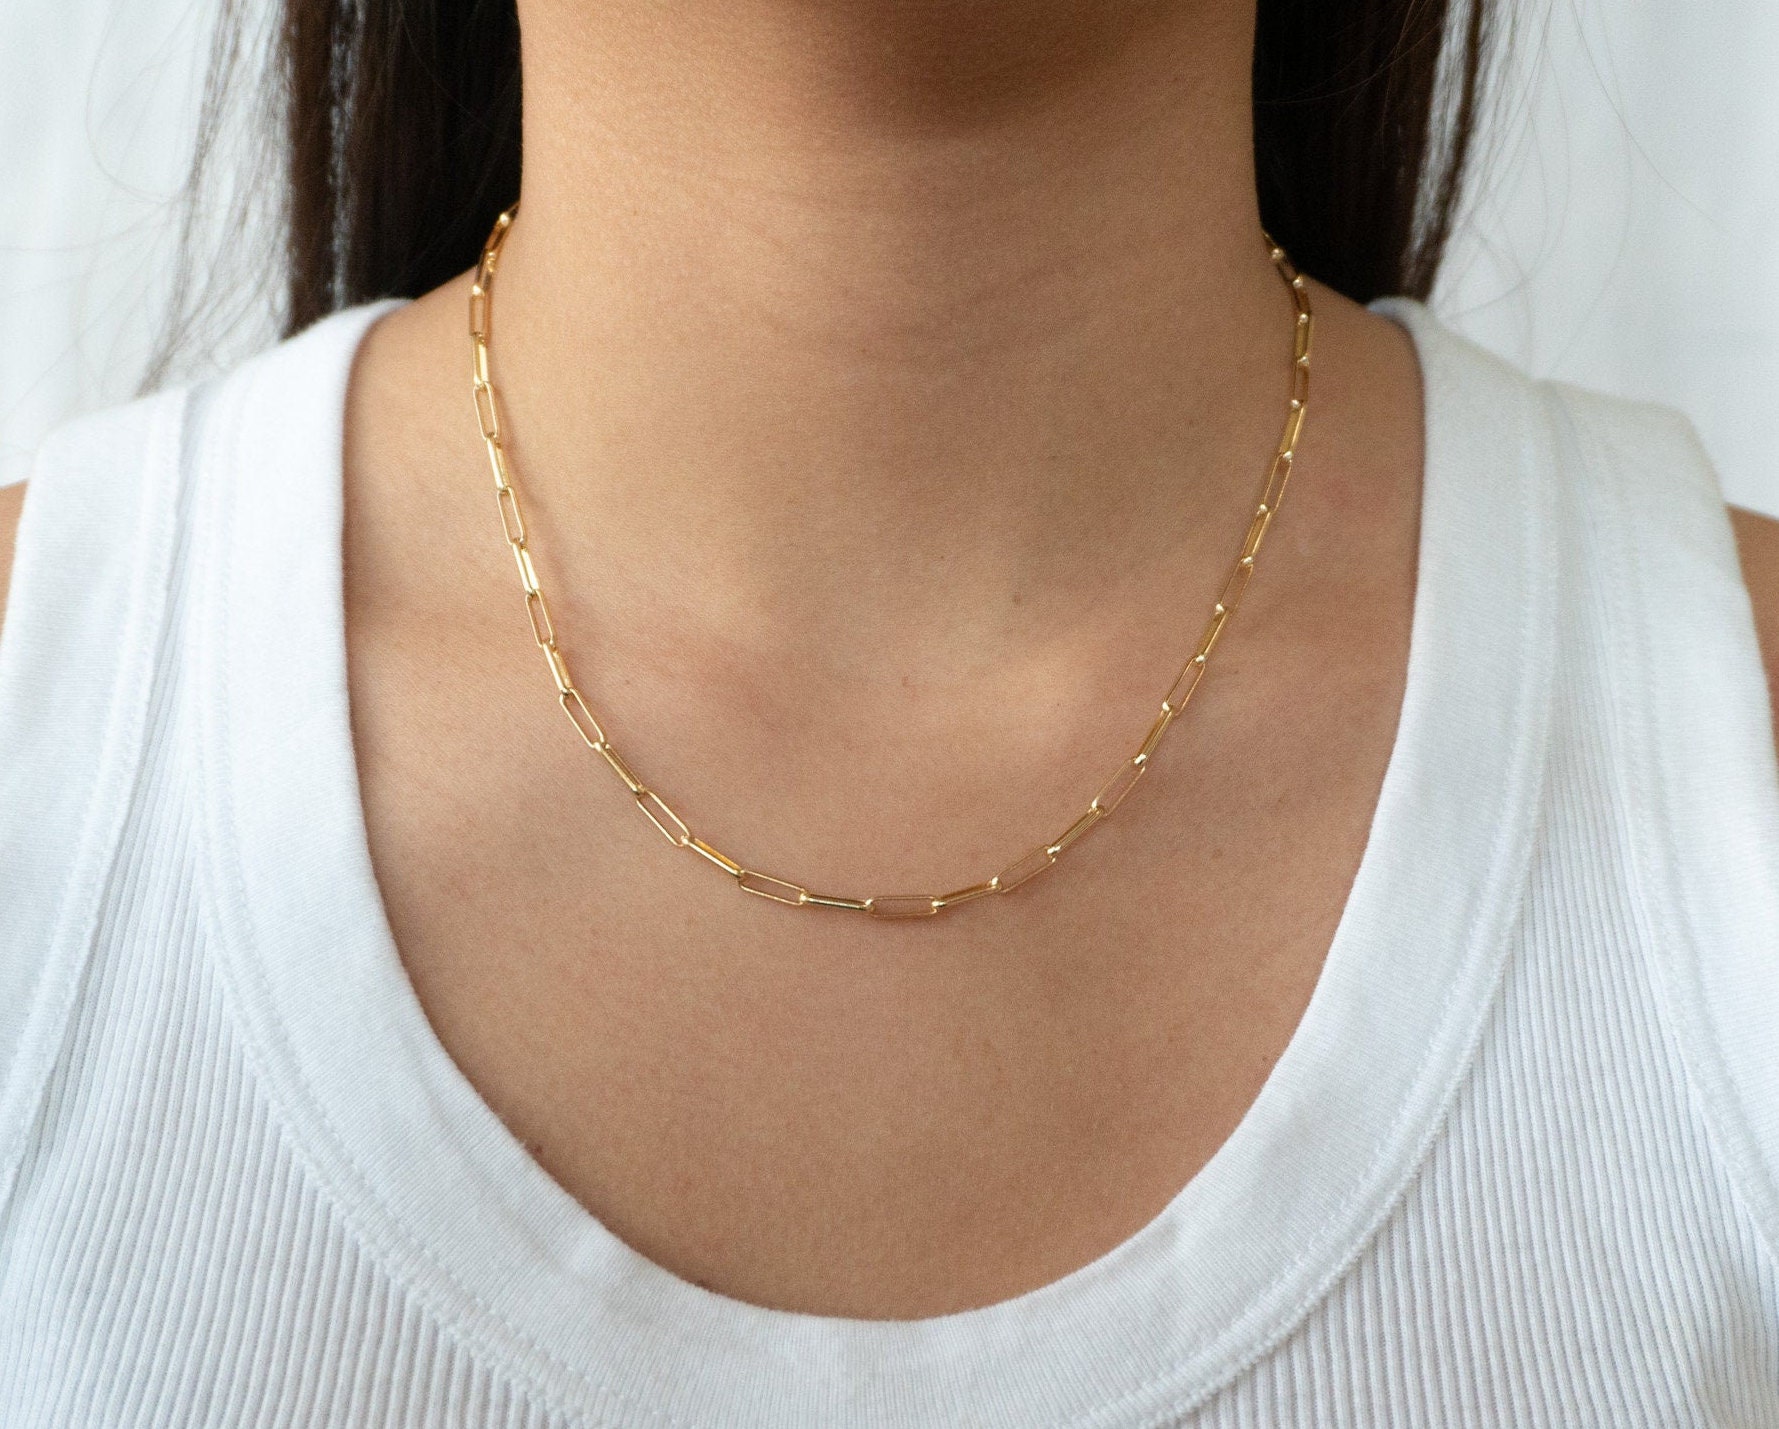  FAY & LOUIS Chunky Gold Chain Big Link Necklaces for Women 14K  Gold Plated Paperclip U Shape Link Chain Choker Paper Clip Trendy Pendant  Cute Jewelry Collares De Mujer De Moda